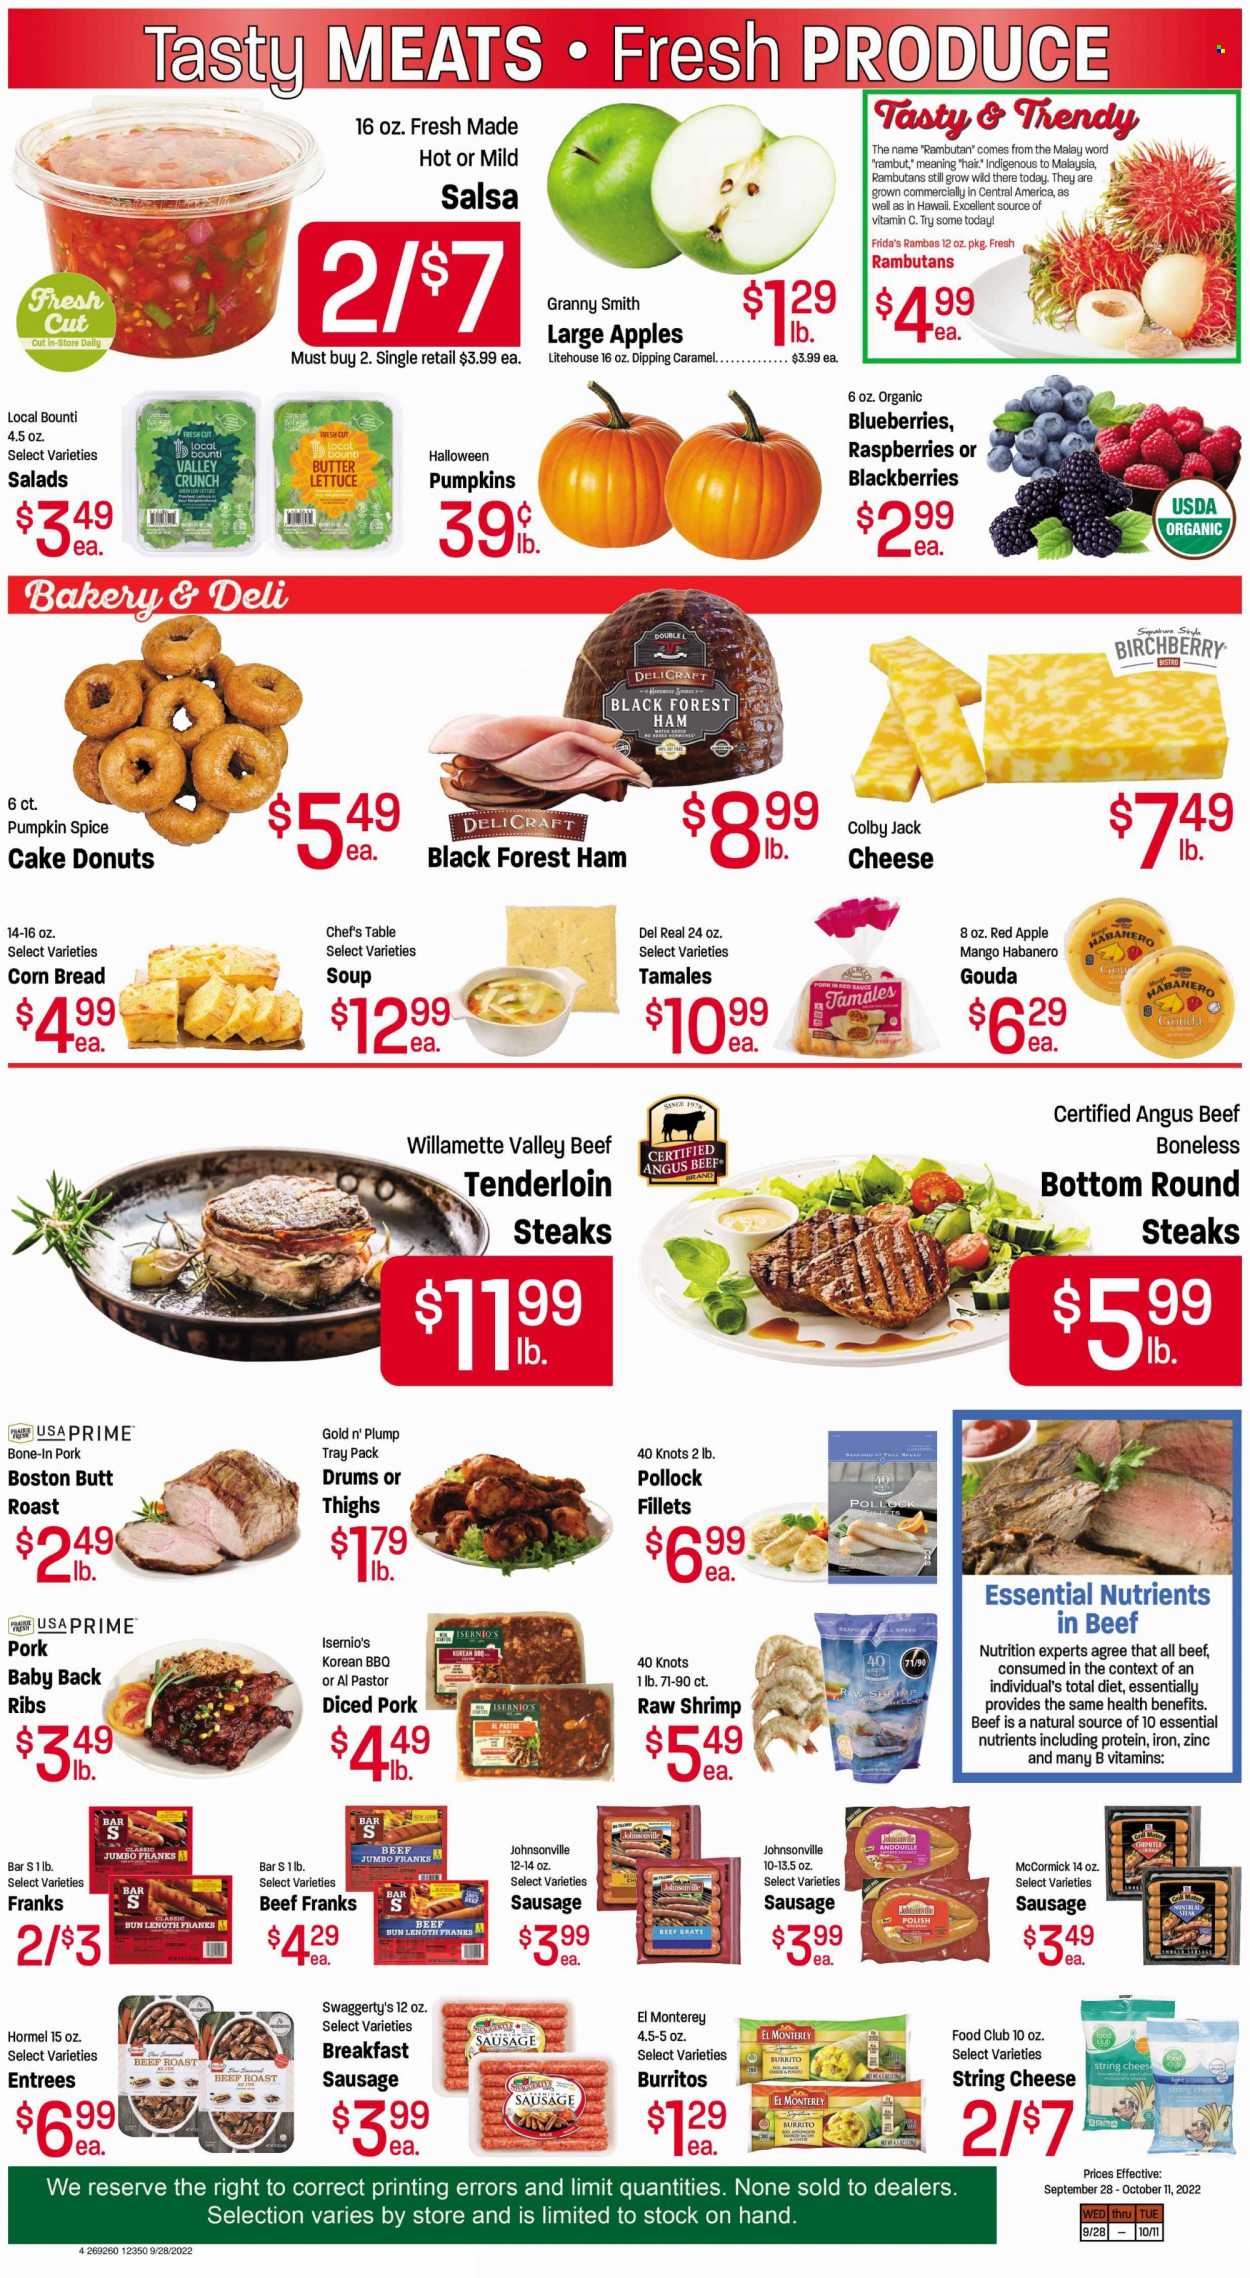 thumbnail - Fresh Market Flyer - 09/28/2022 - 10/11/2022 - Sales products - bread, cake, corn bread, donut, butter lettuce, lettuce, apples, blackberries, blueberries, Granny Smith, pollock, seafood, shrimps, soup, sauce, burrito, Hormel, bacon, ham, Johnsonville, sausage, Colby cheese, gouda, mozzarella, string cheese, cheese, spice, caramel, salsa, beef meat, steak, beef tenderloin, roast beef, pork meat, pork ribs, pork back ribs, Halloween, grill, vitamin c, zinc. Page 4.